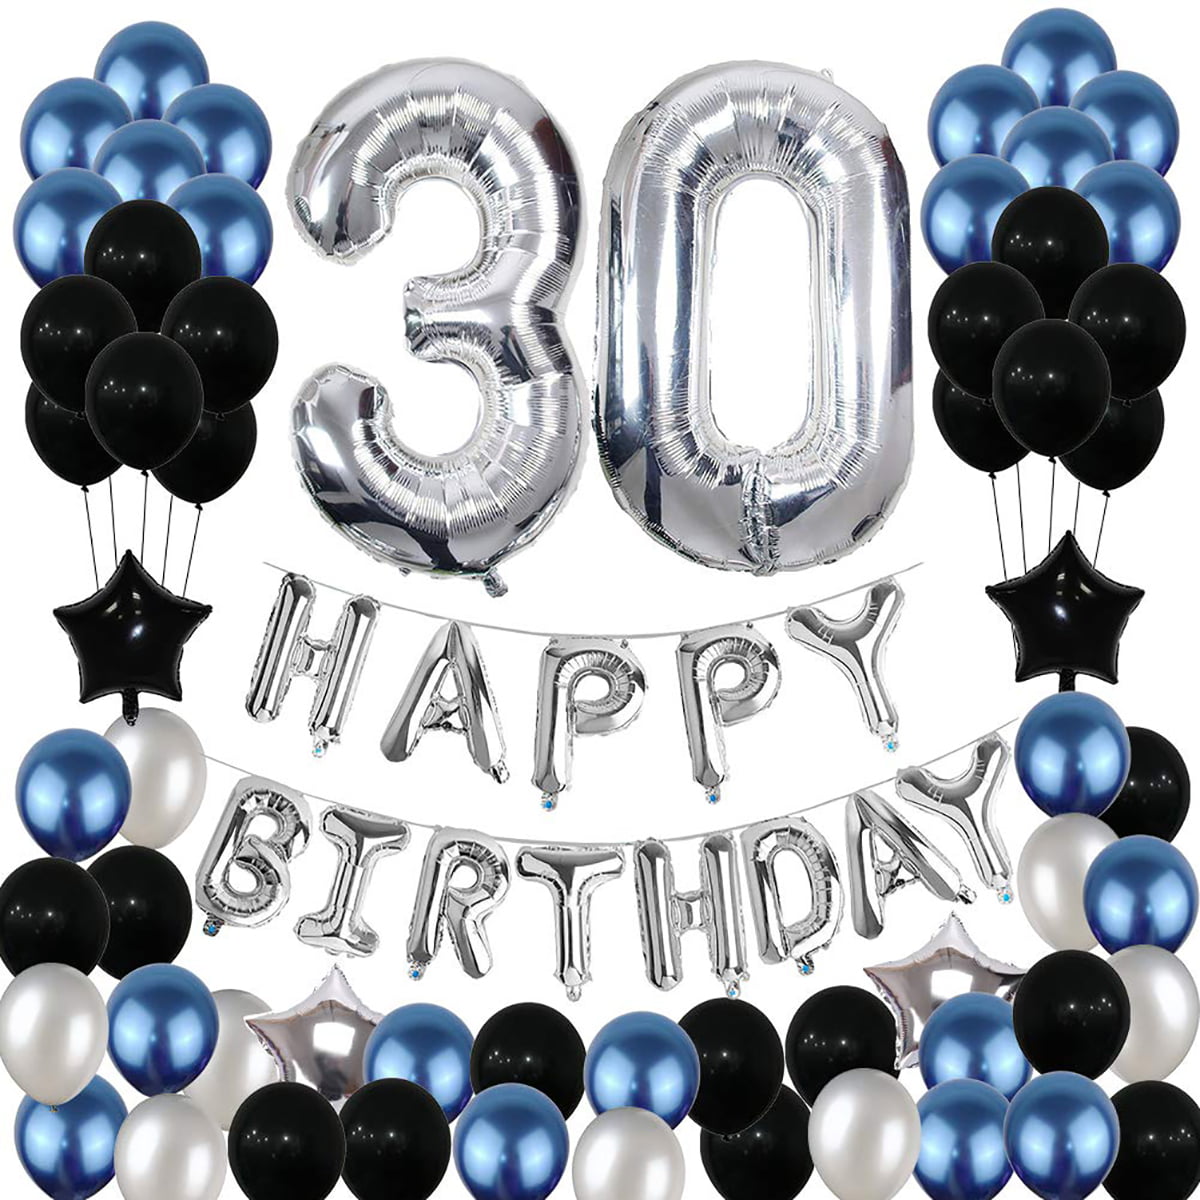 Silver Glittered Age 30 30th Birthday Table Centrepiece Decoration New & Boxed 